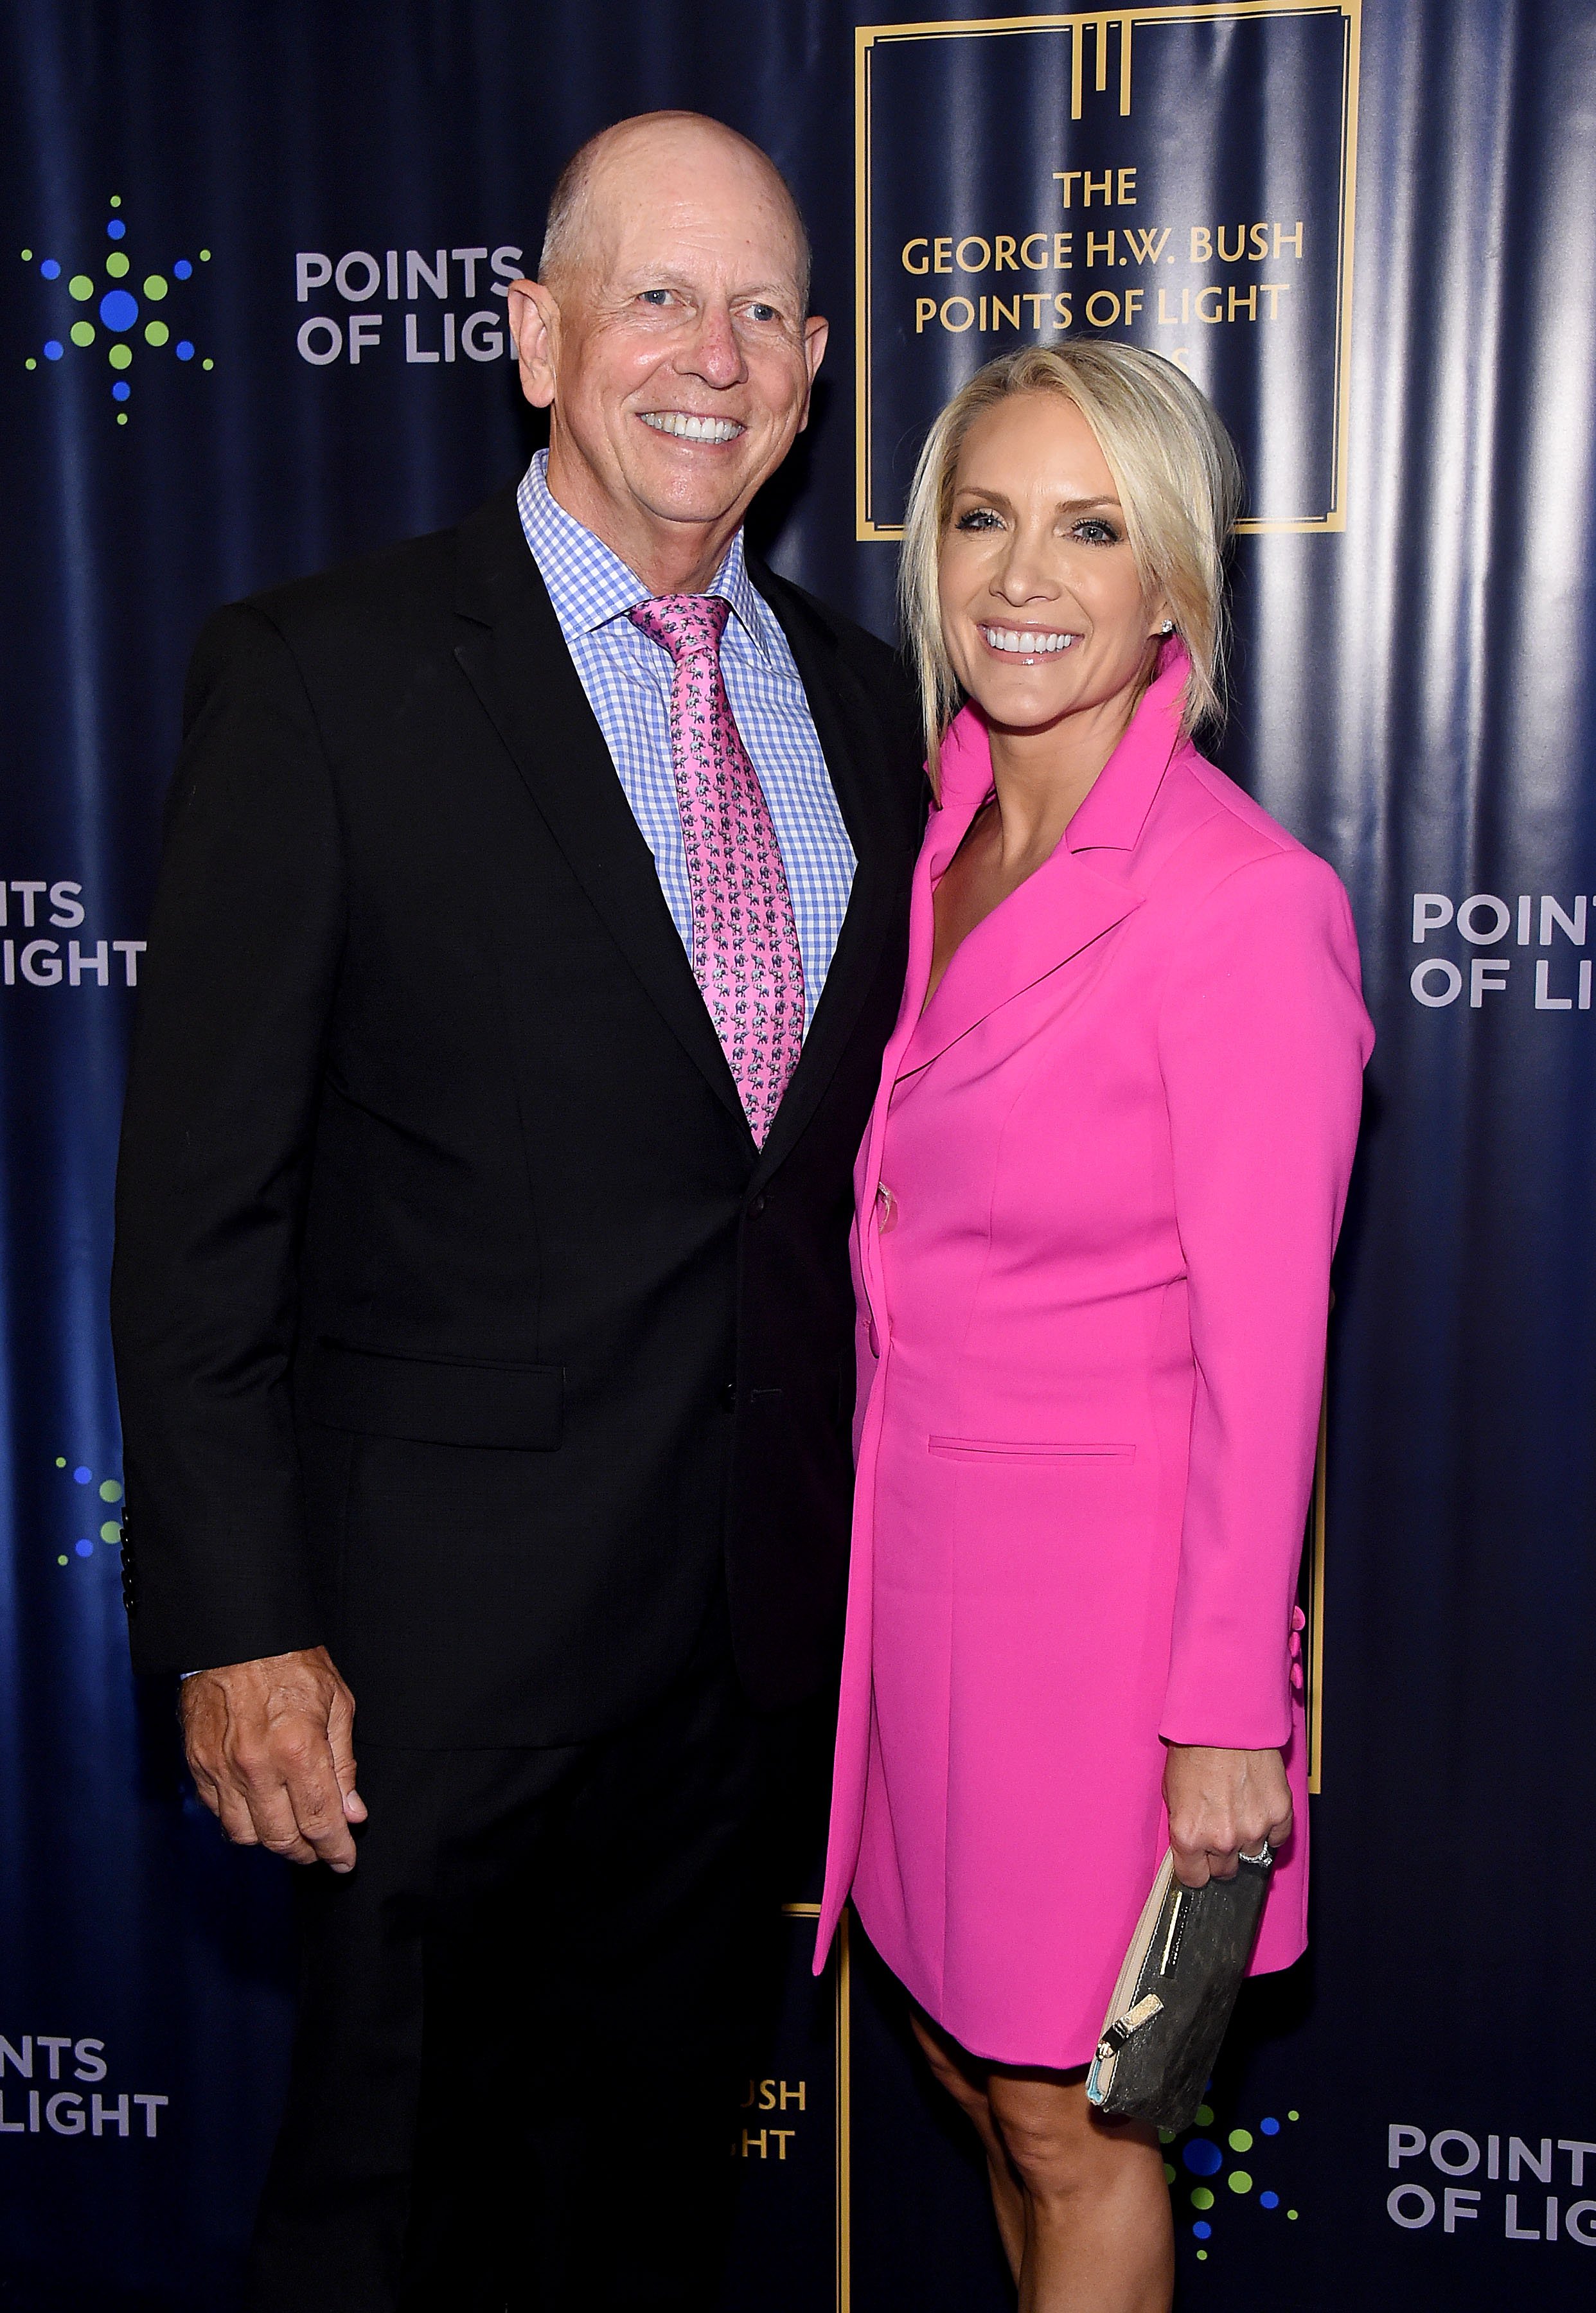 Peter McMahon and Dana Perino at The George H.W. Bush Points Of Light Awards Gala on September 26, 2019 at Intrepid Sea-Air-Space Museum, New York City. | Source: Getty Images